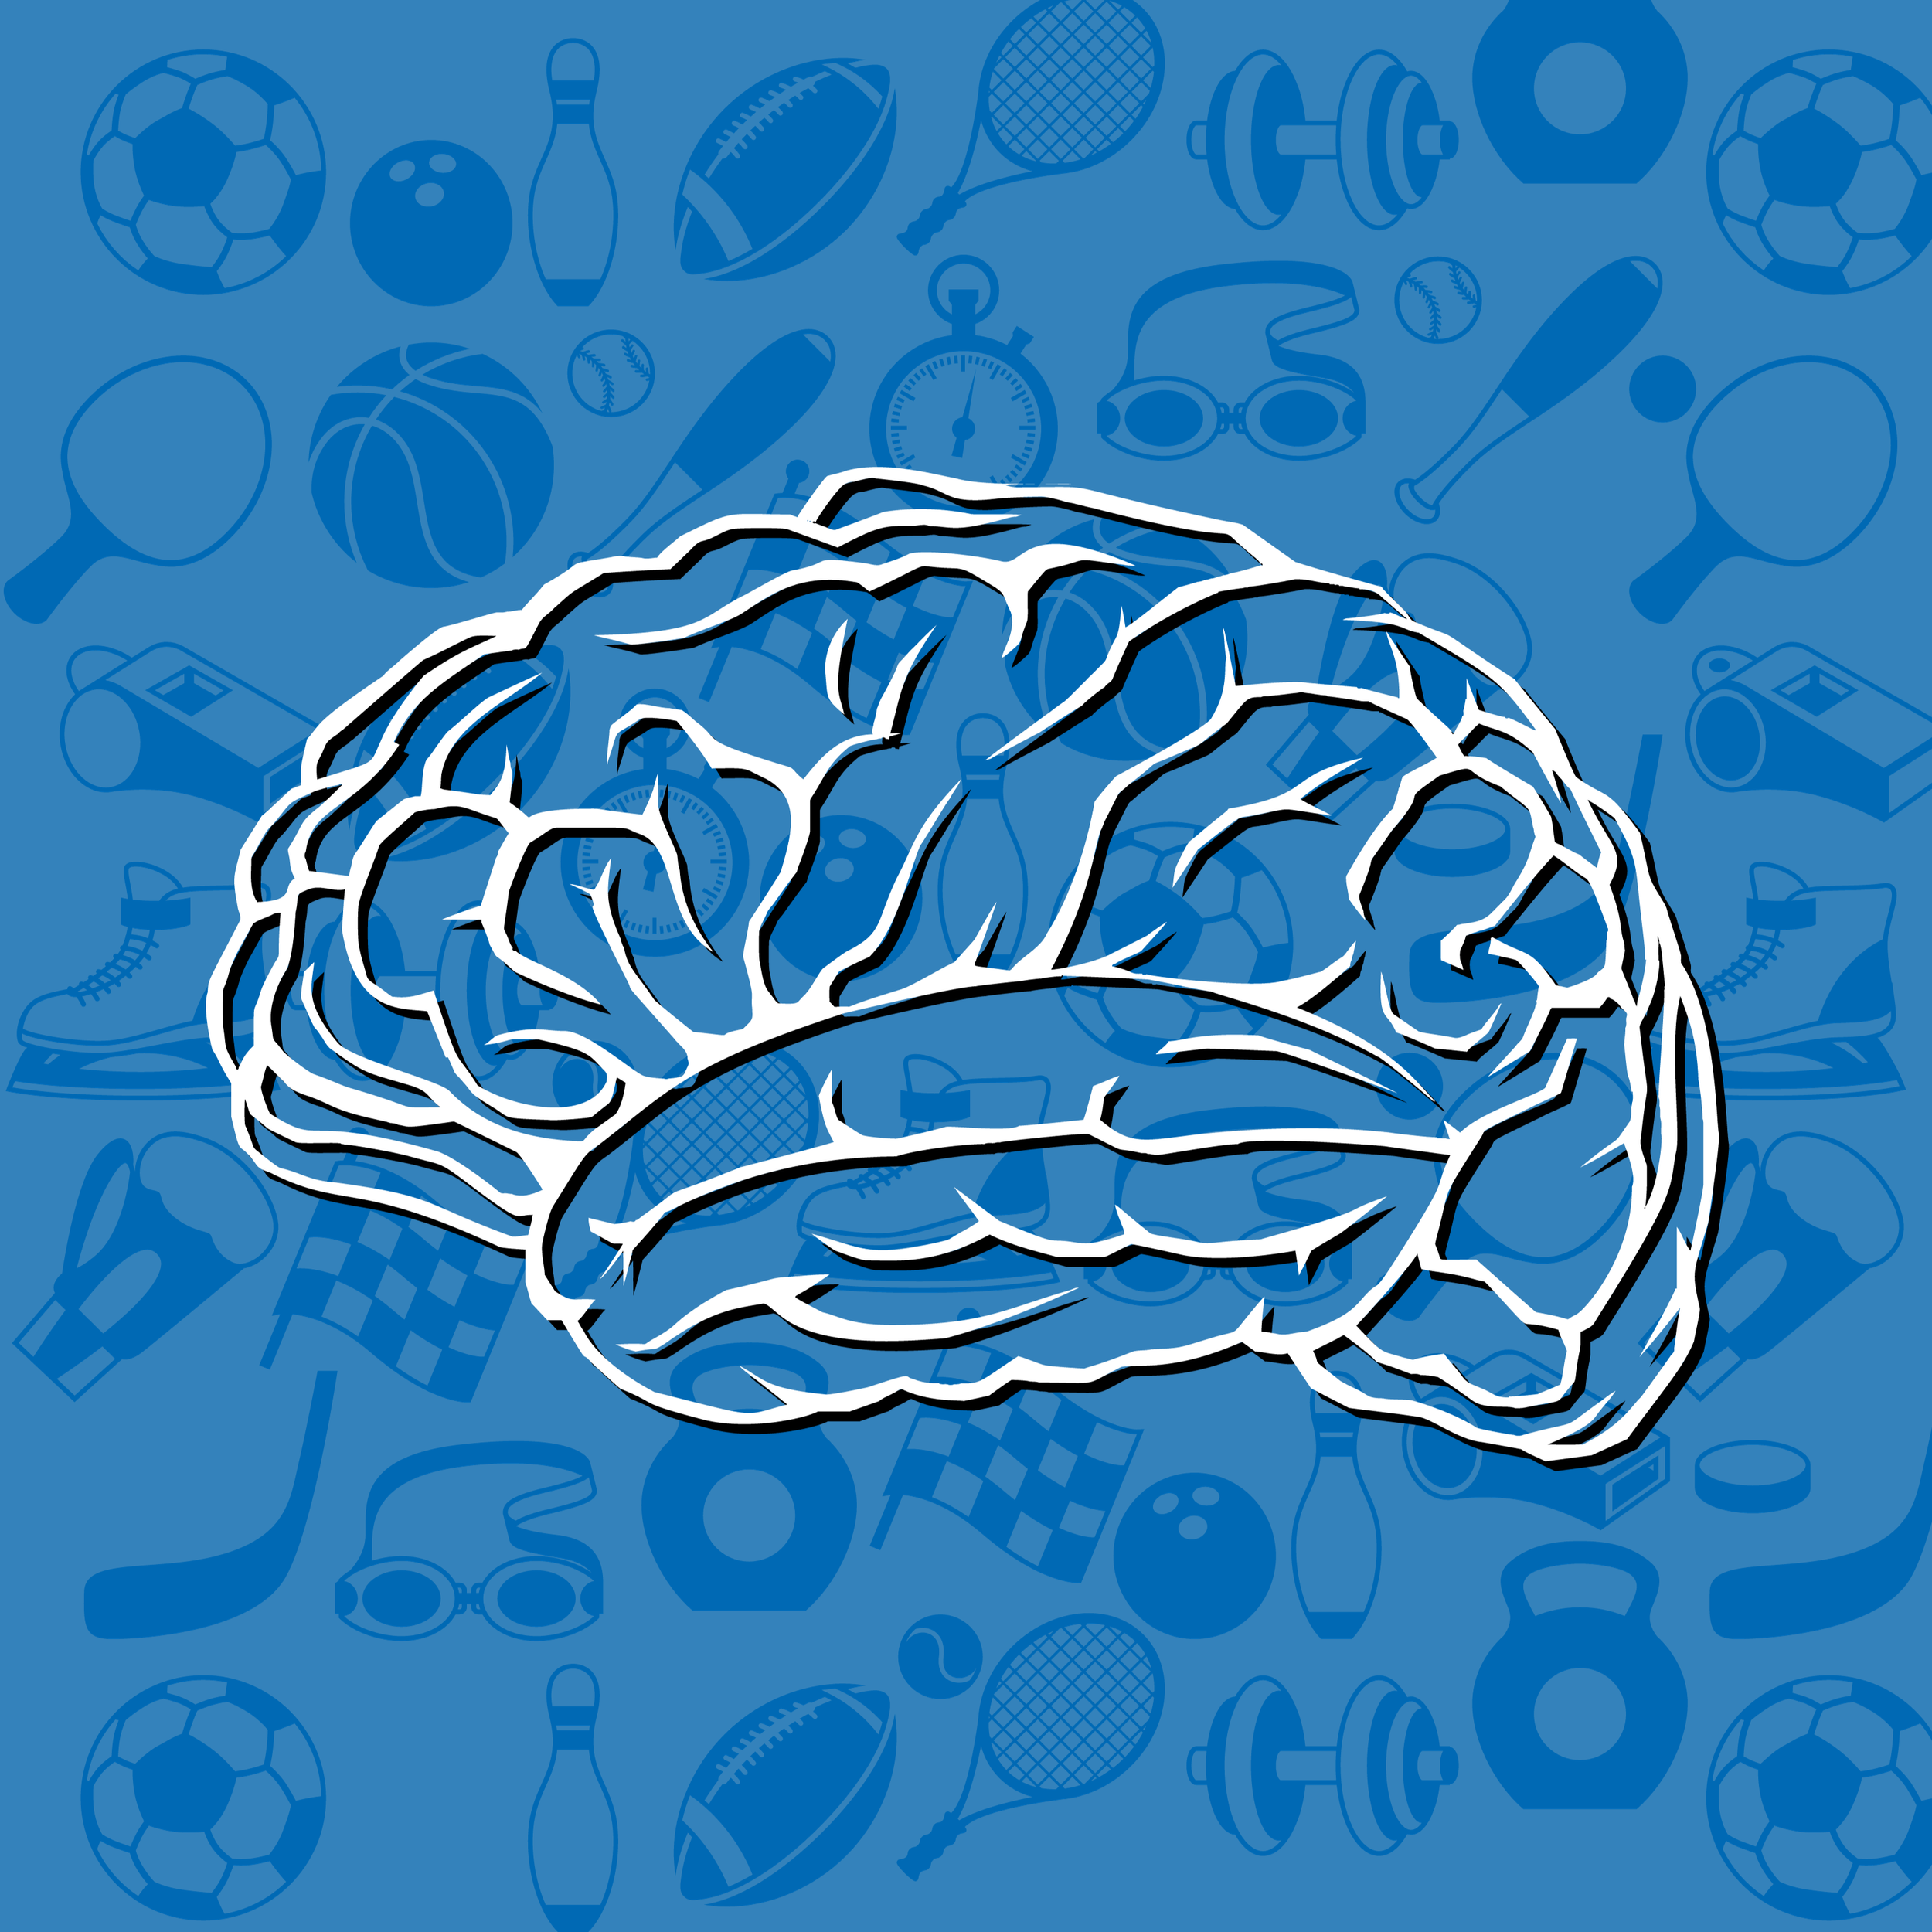 The Psychology of Sports